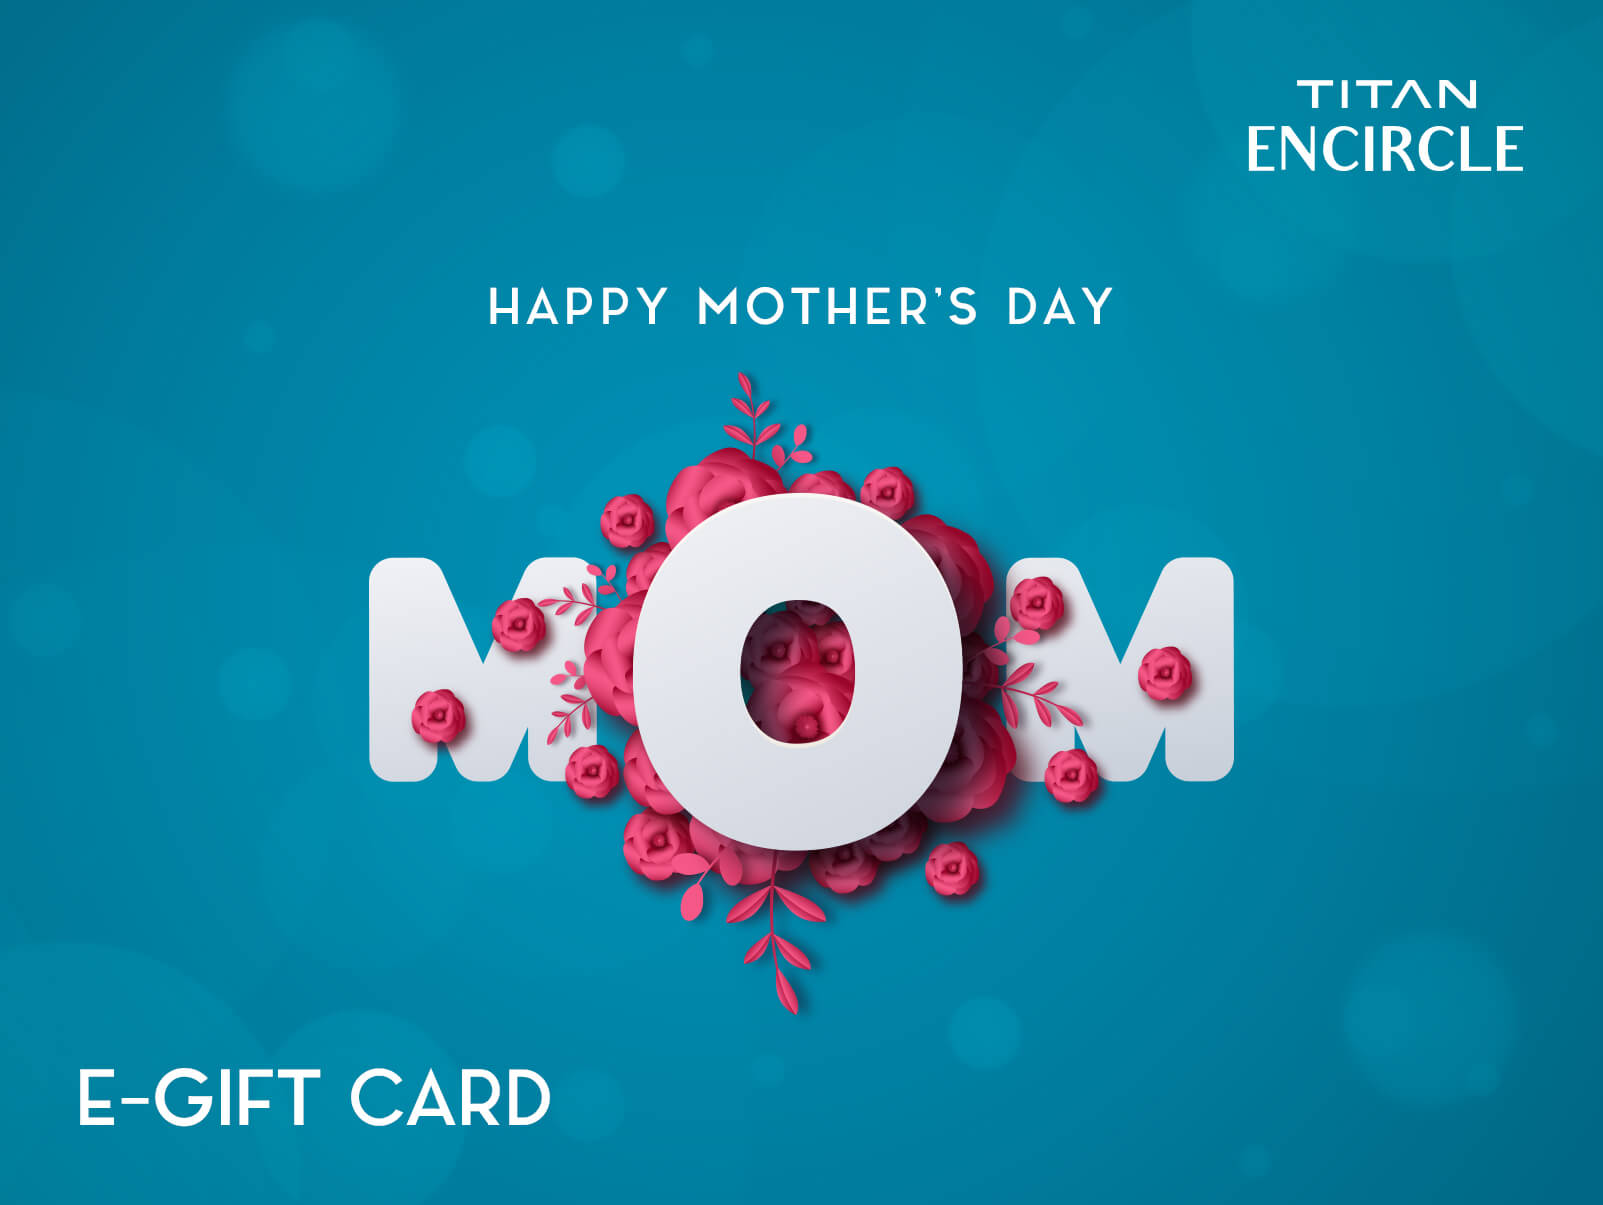 Buy Gift Card on Mothers Day